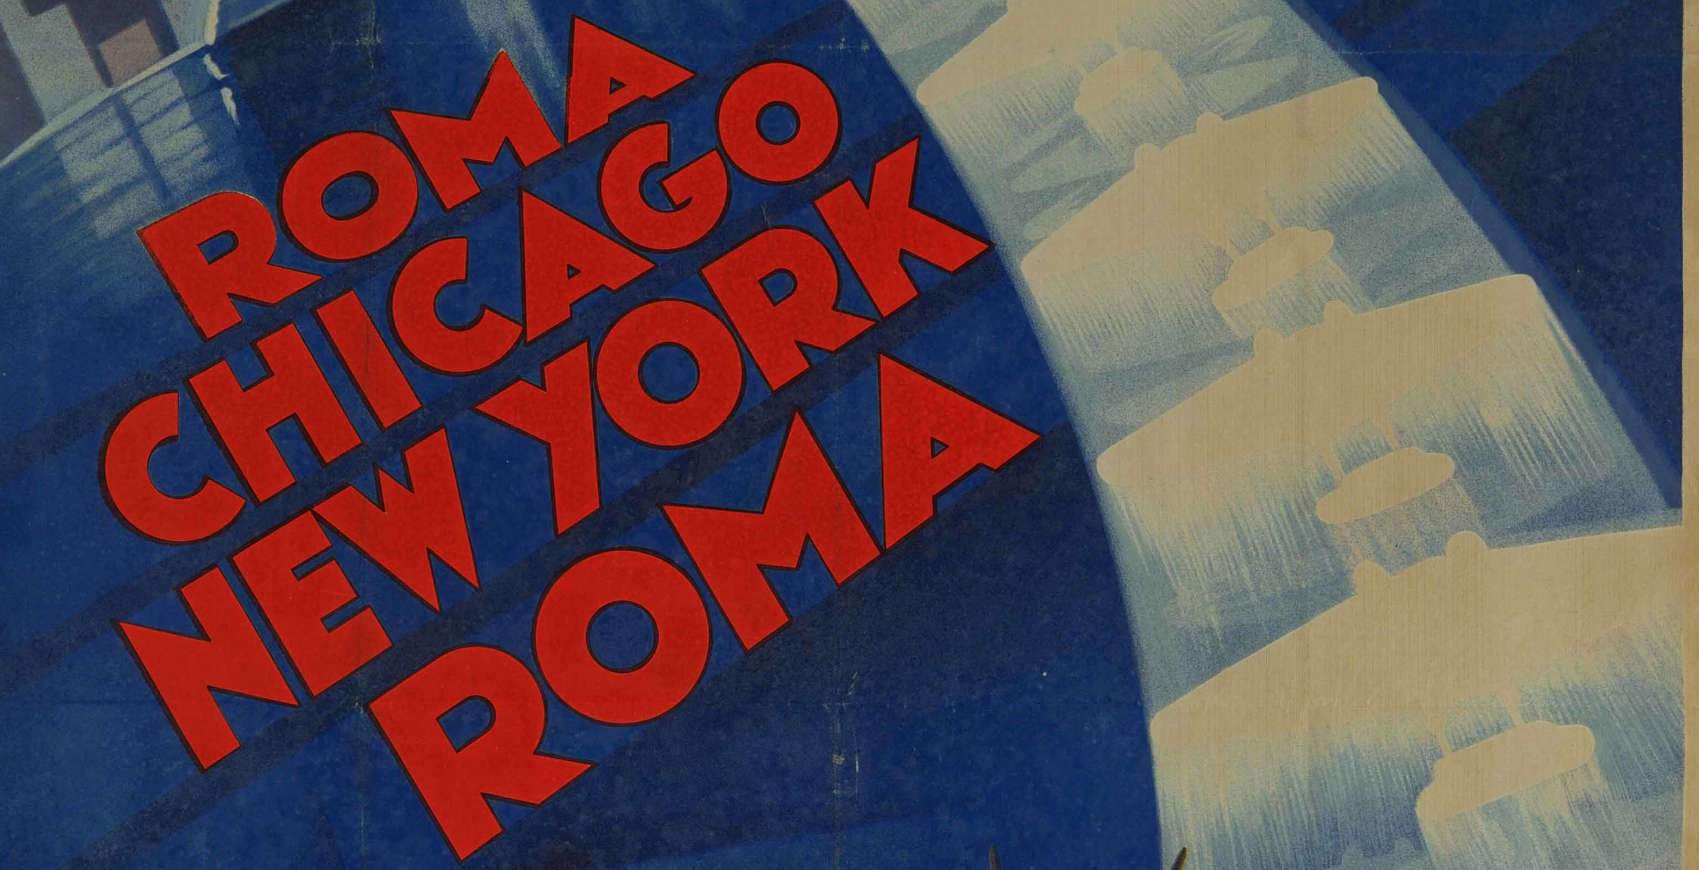 Paper Futurism: advertising posters from the 1930s on display in Treviso